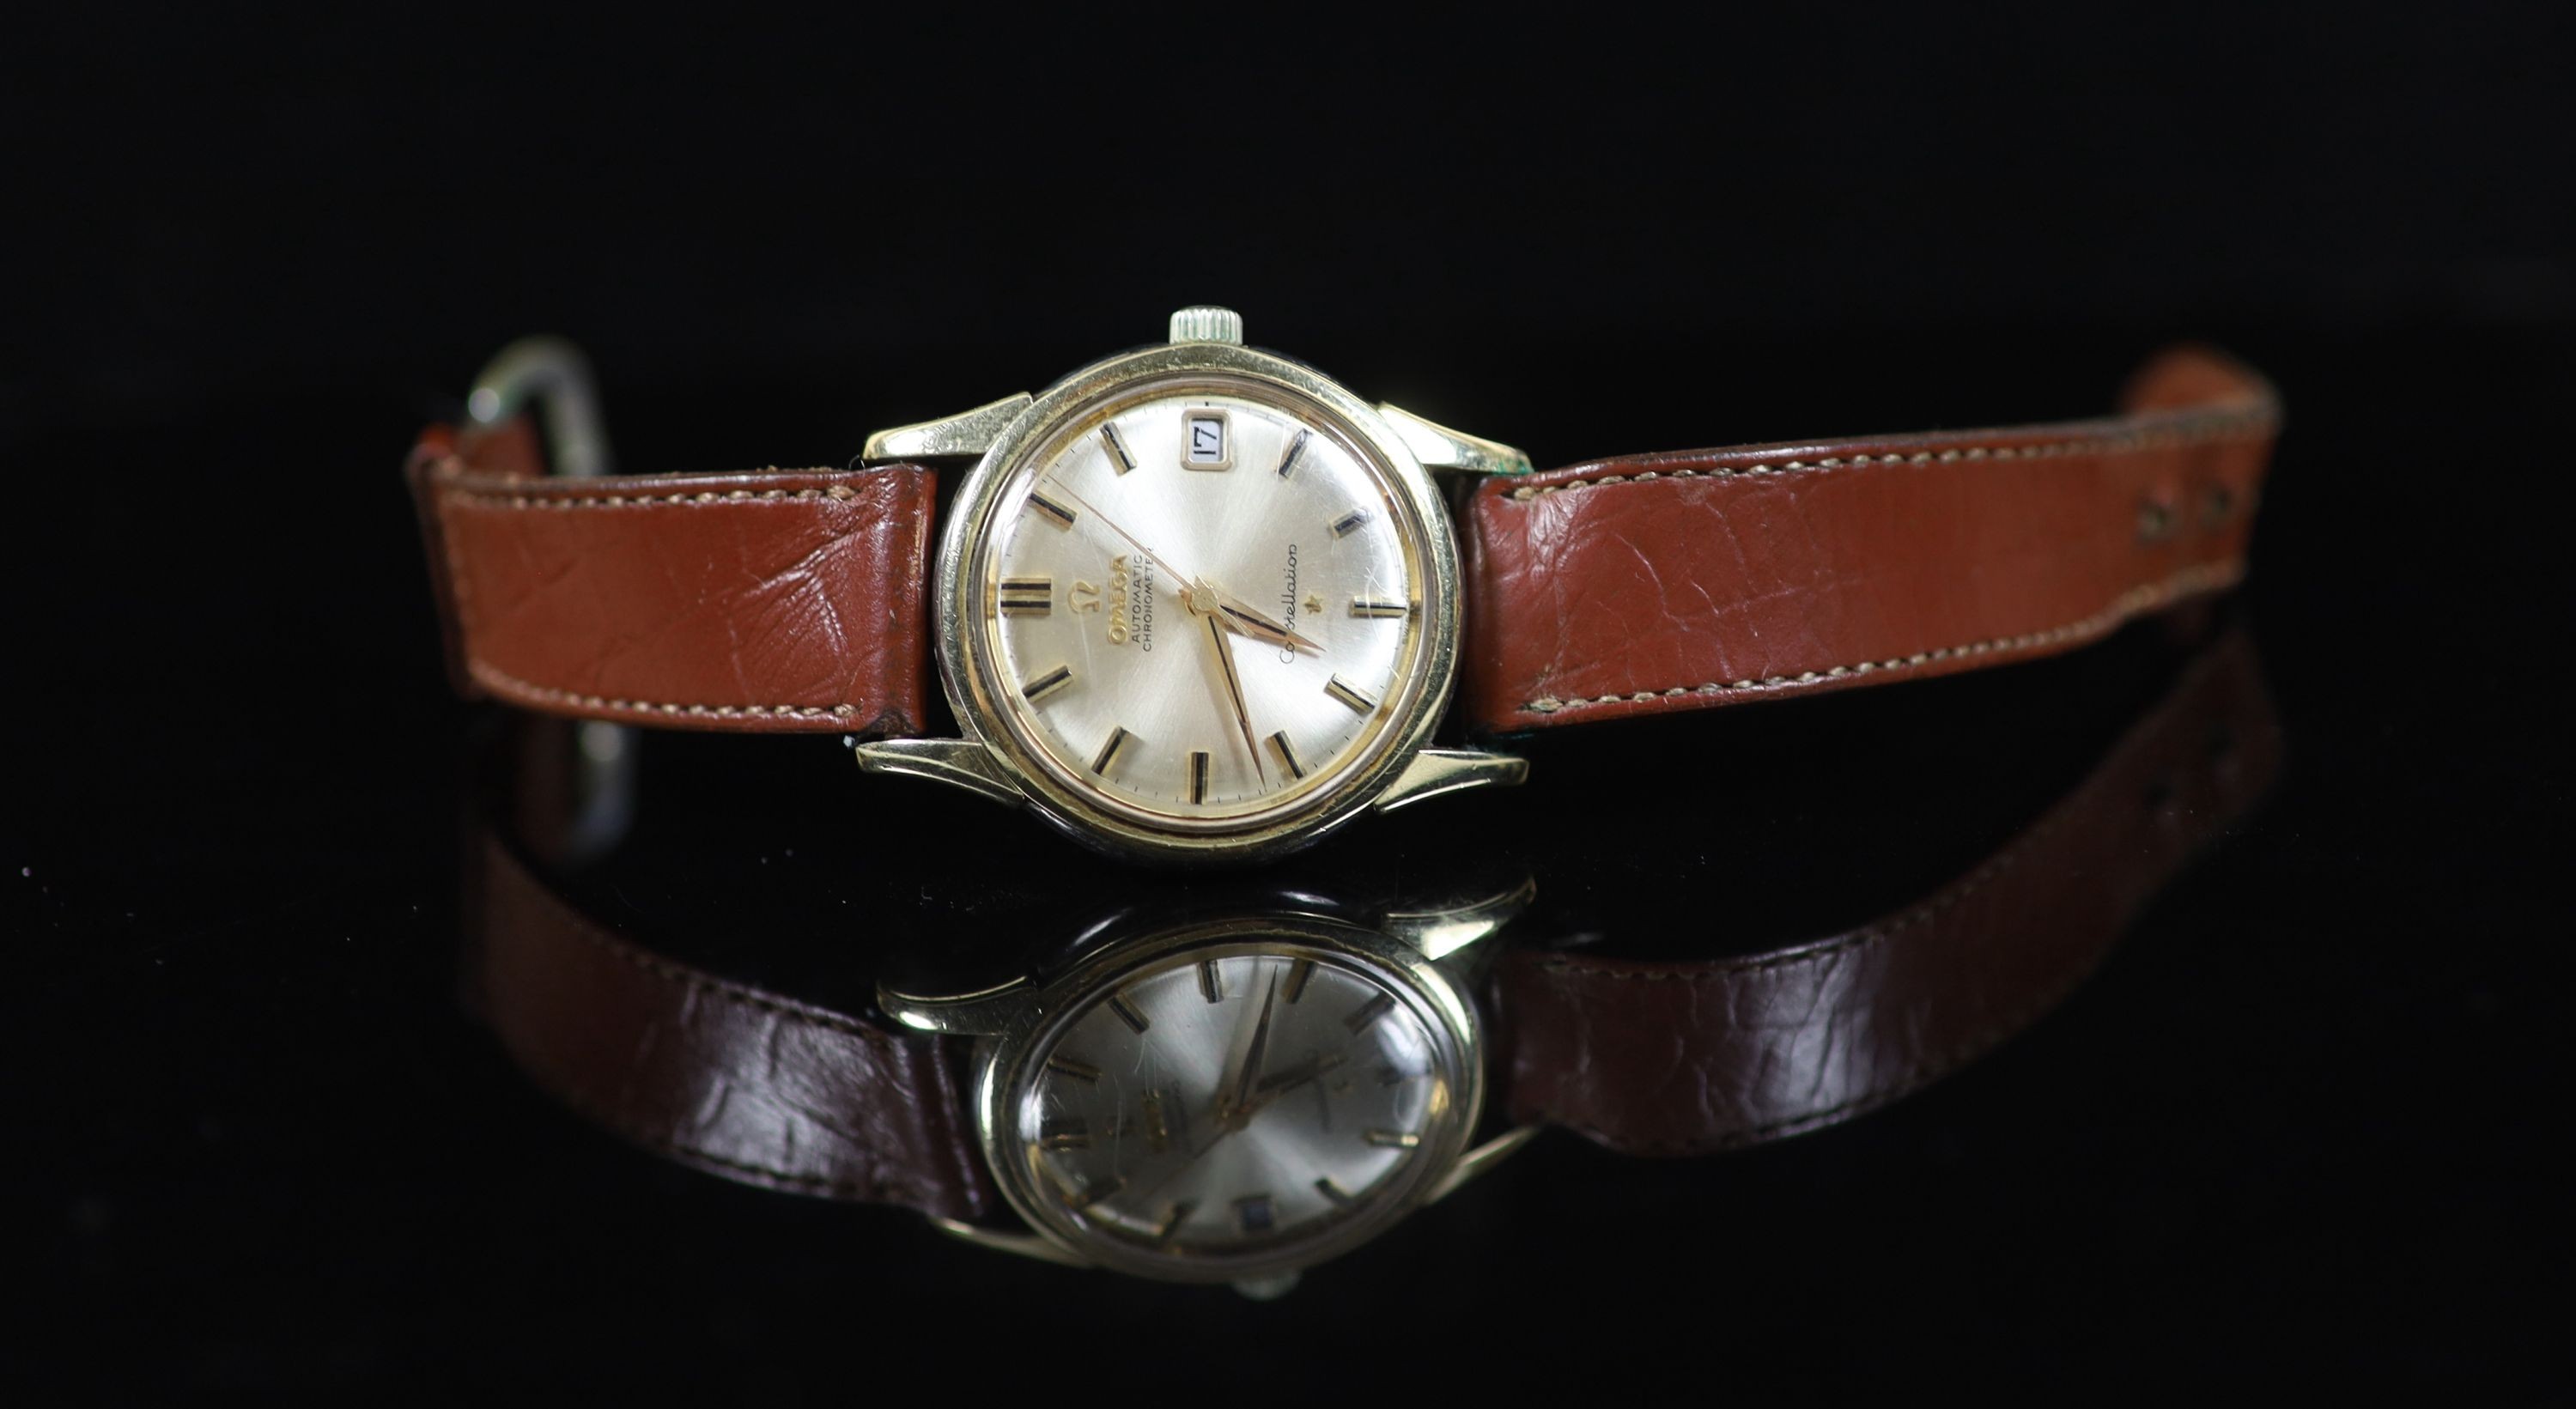 A gentleman's stainless steel and gold plated Omega Constellation automatic chronometer wrist watch